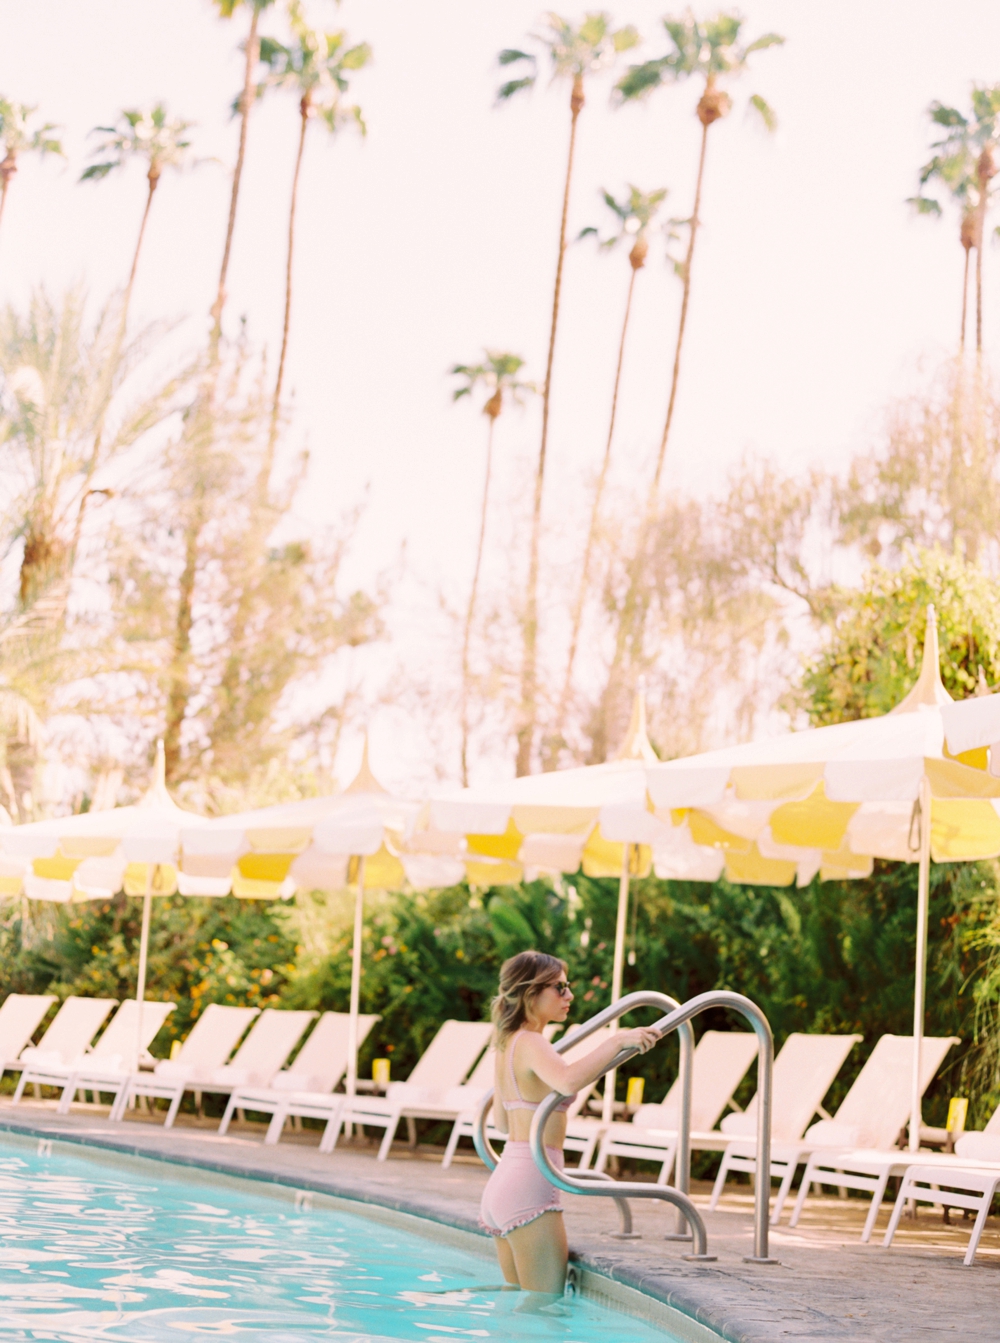 California Wedding Photographers | The Parker Palm Springs | Life Set Sail at the Pool | Canadian Fashion Bloggers